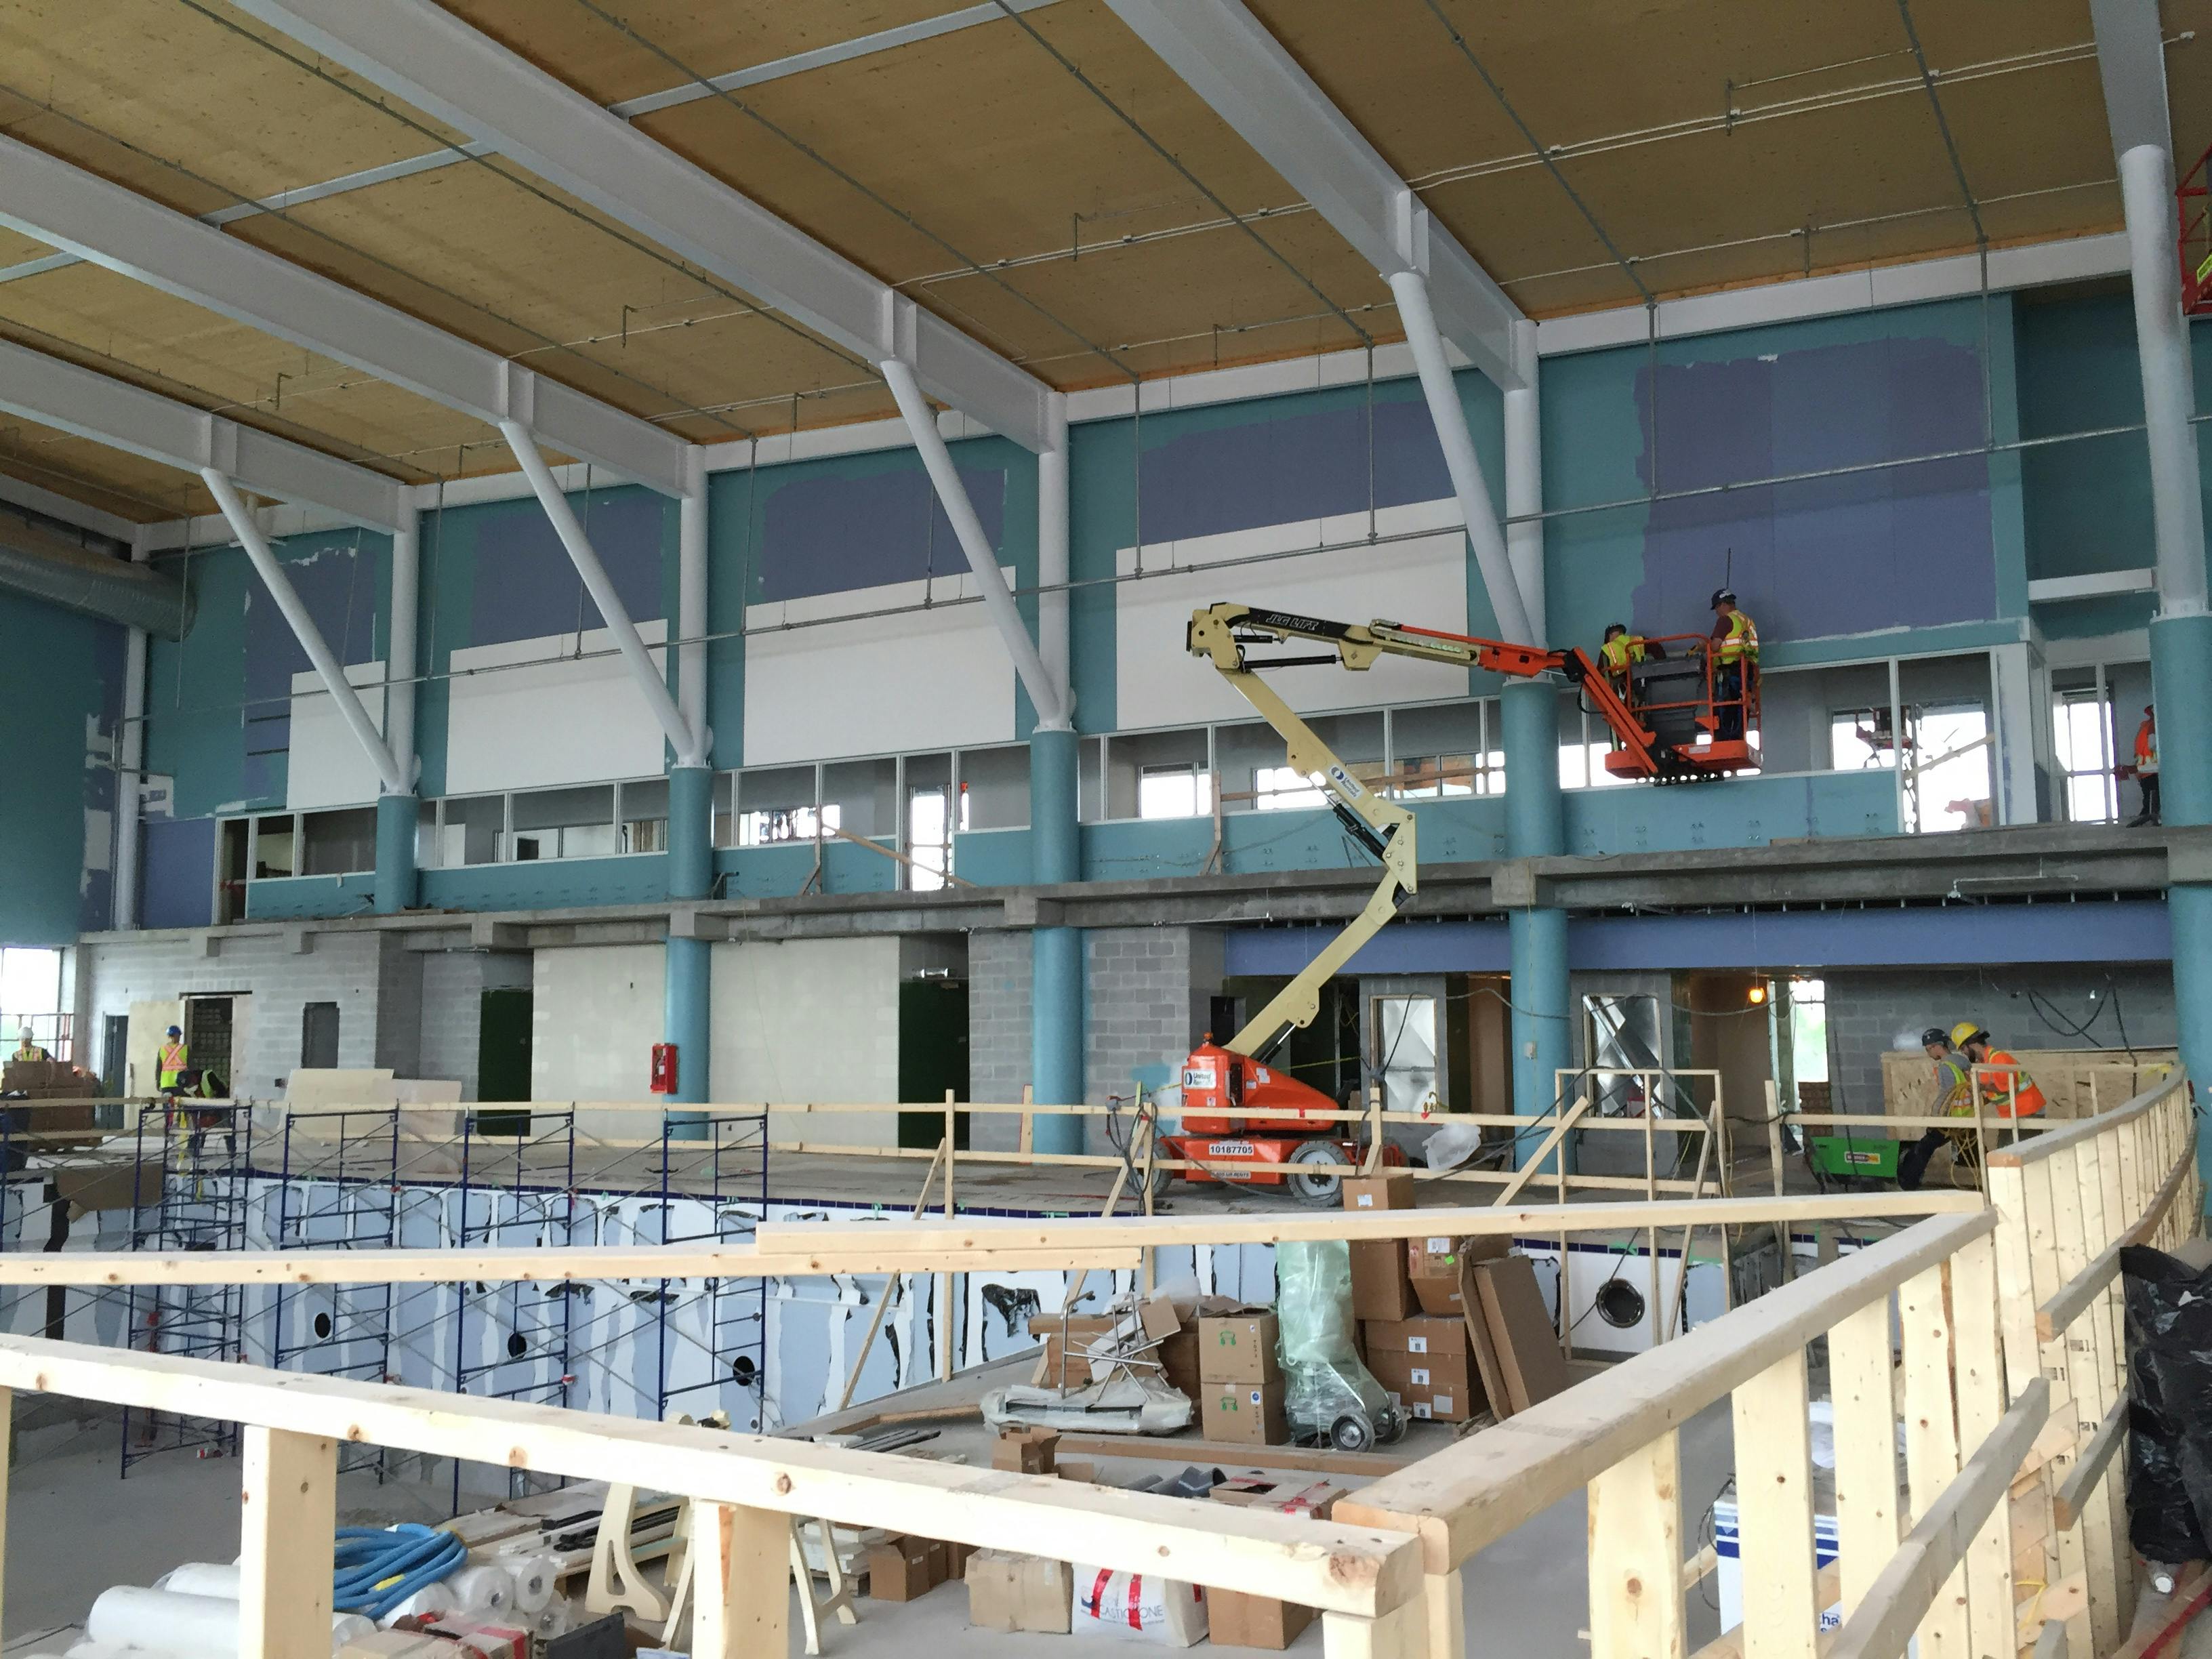 workers installing sound-reducing panels on ceiling and walls of Aquatic Centre, June 22nd